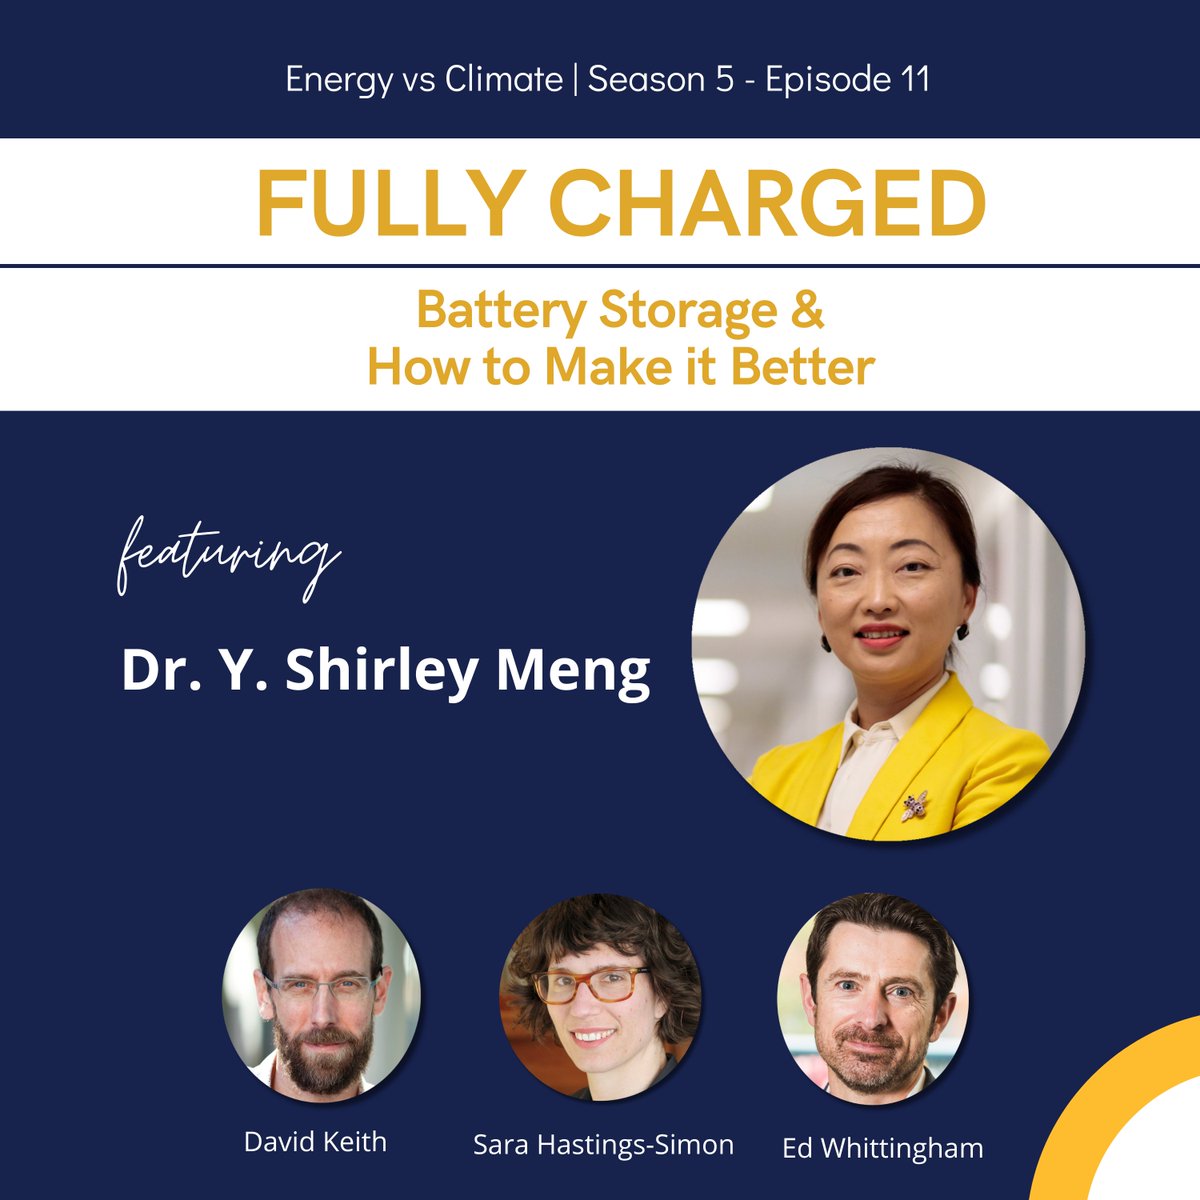 New EvC live show: FULLY CHARGED-Battery Storage & How to Make it Better Join @DKeithClimate, Sara, & @EdWhittingham as they chat with battery storage expert @YingShirleyMeng of the @UofC on May 7 at 11am ET Register at: energyvsclimate.com/youre-invited-… #climate #technology #science